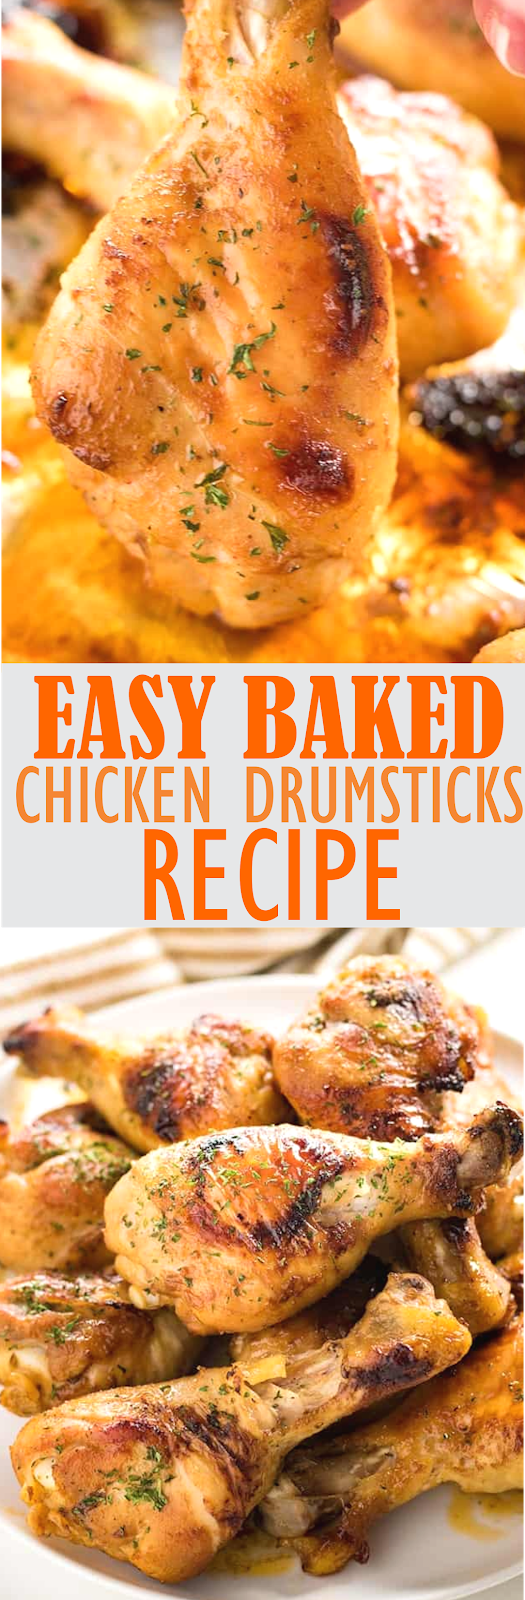 EASY BAKED CHICKEN DRUMSTICKS RECIPE | Show You Recipes